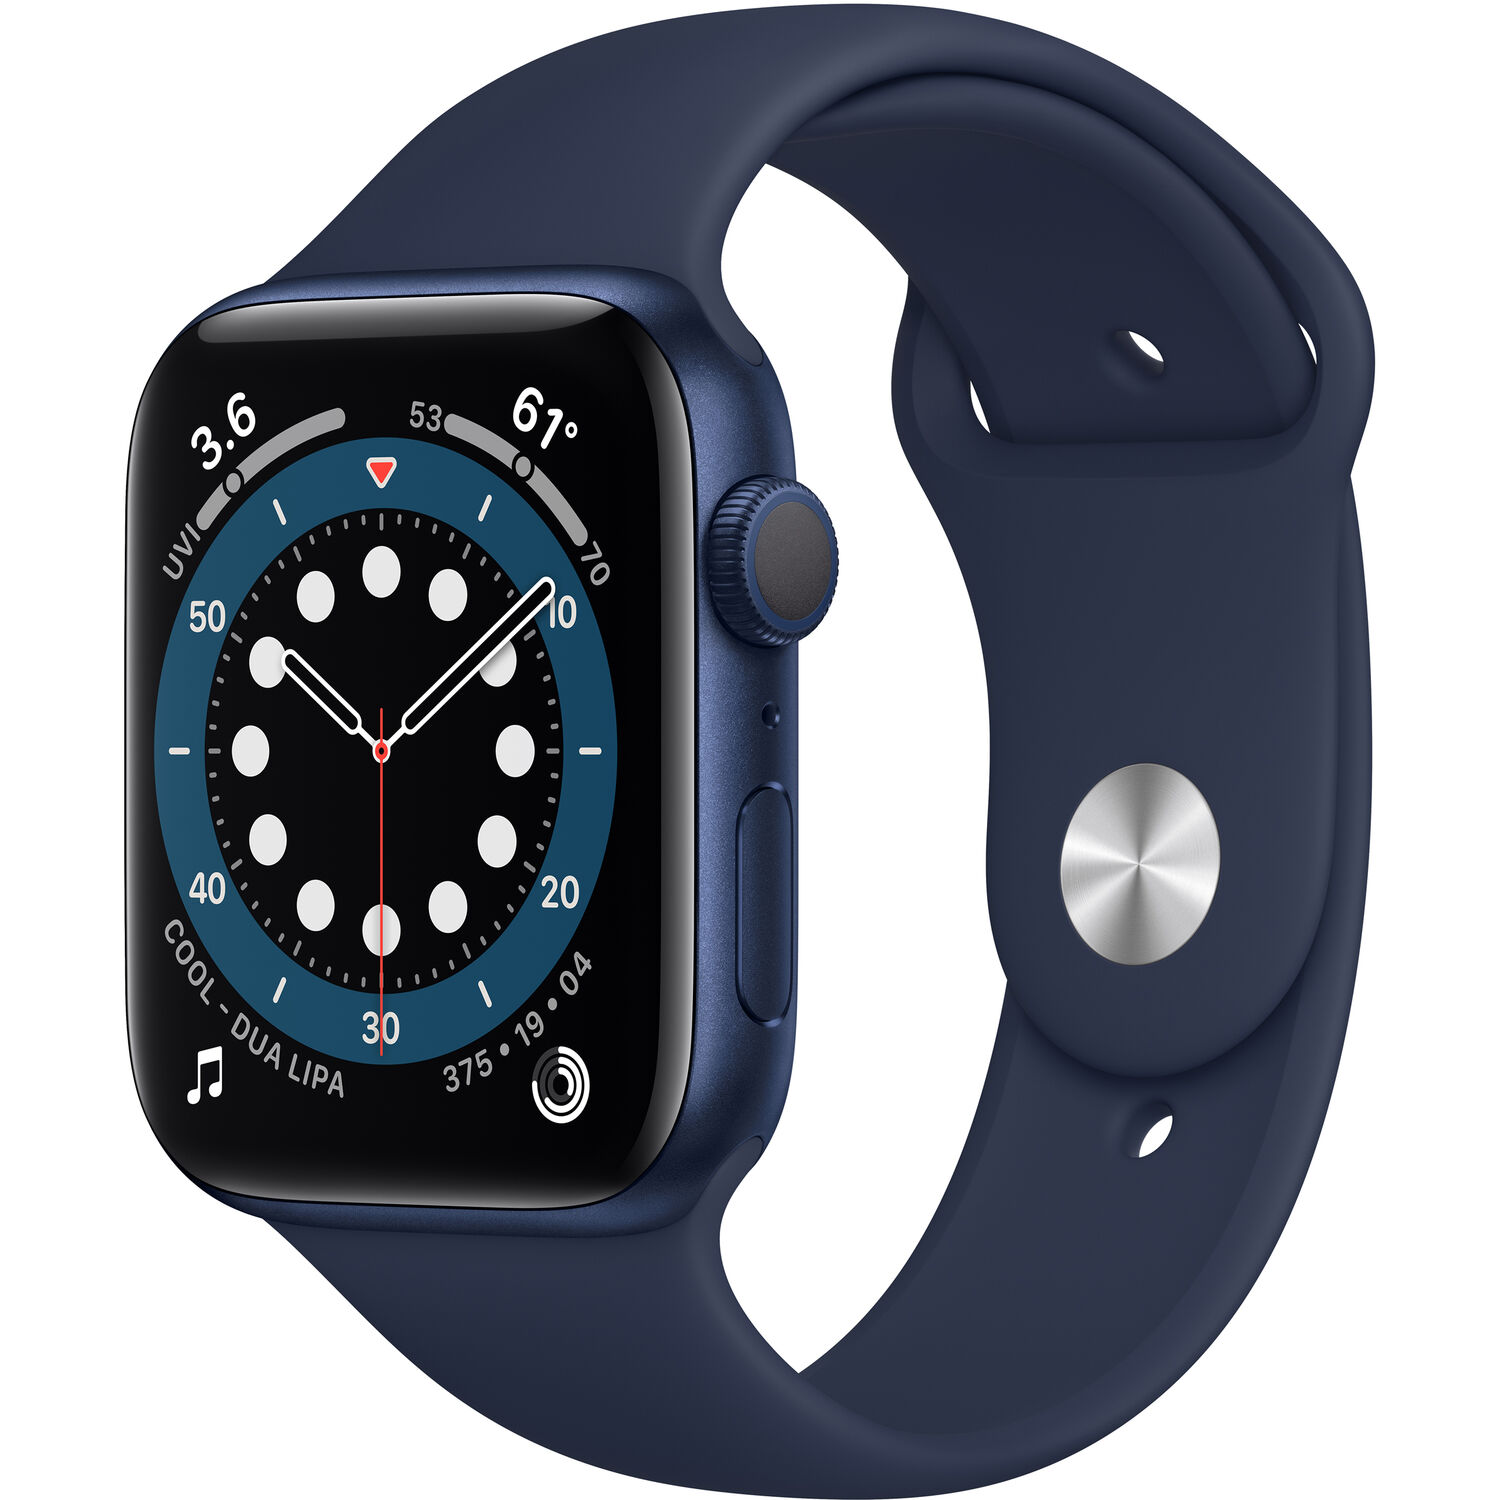 Apple Watch Series 6 Blue Aluminum Case with Sport Band (GPS Cellular - 44mm)